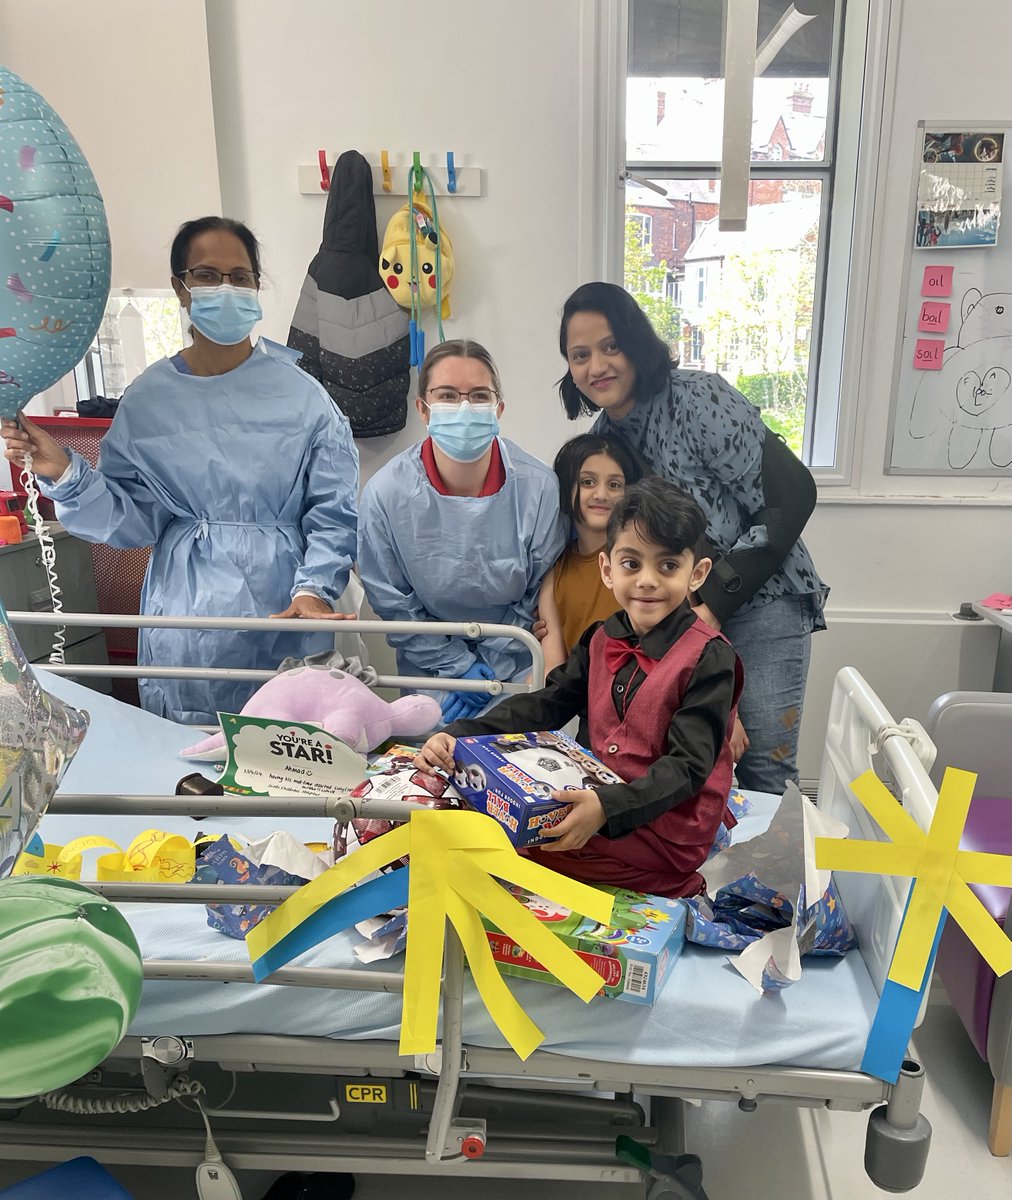 6 year old Ahmad recently managed his midline (catheter) insertion awake, using Virtual Reality Distraction Therapy and local anaesthetic. Ahmad was supported by VR Play Specialist Lucy. Well done Ahmad! @LDShospcharity @LeedsHospitals